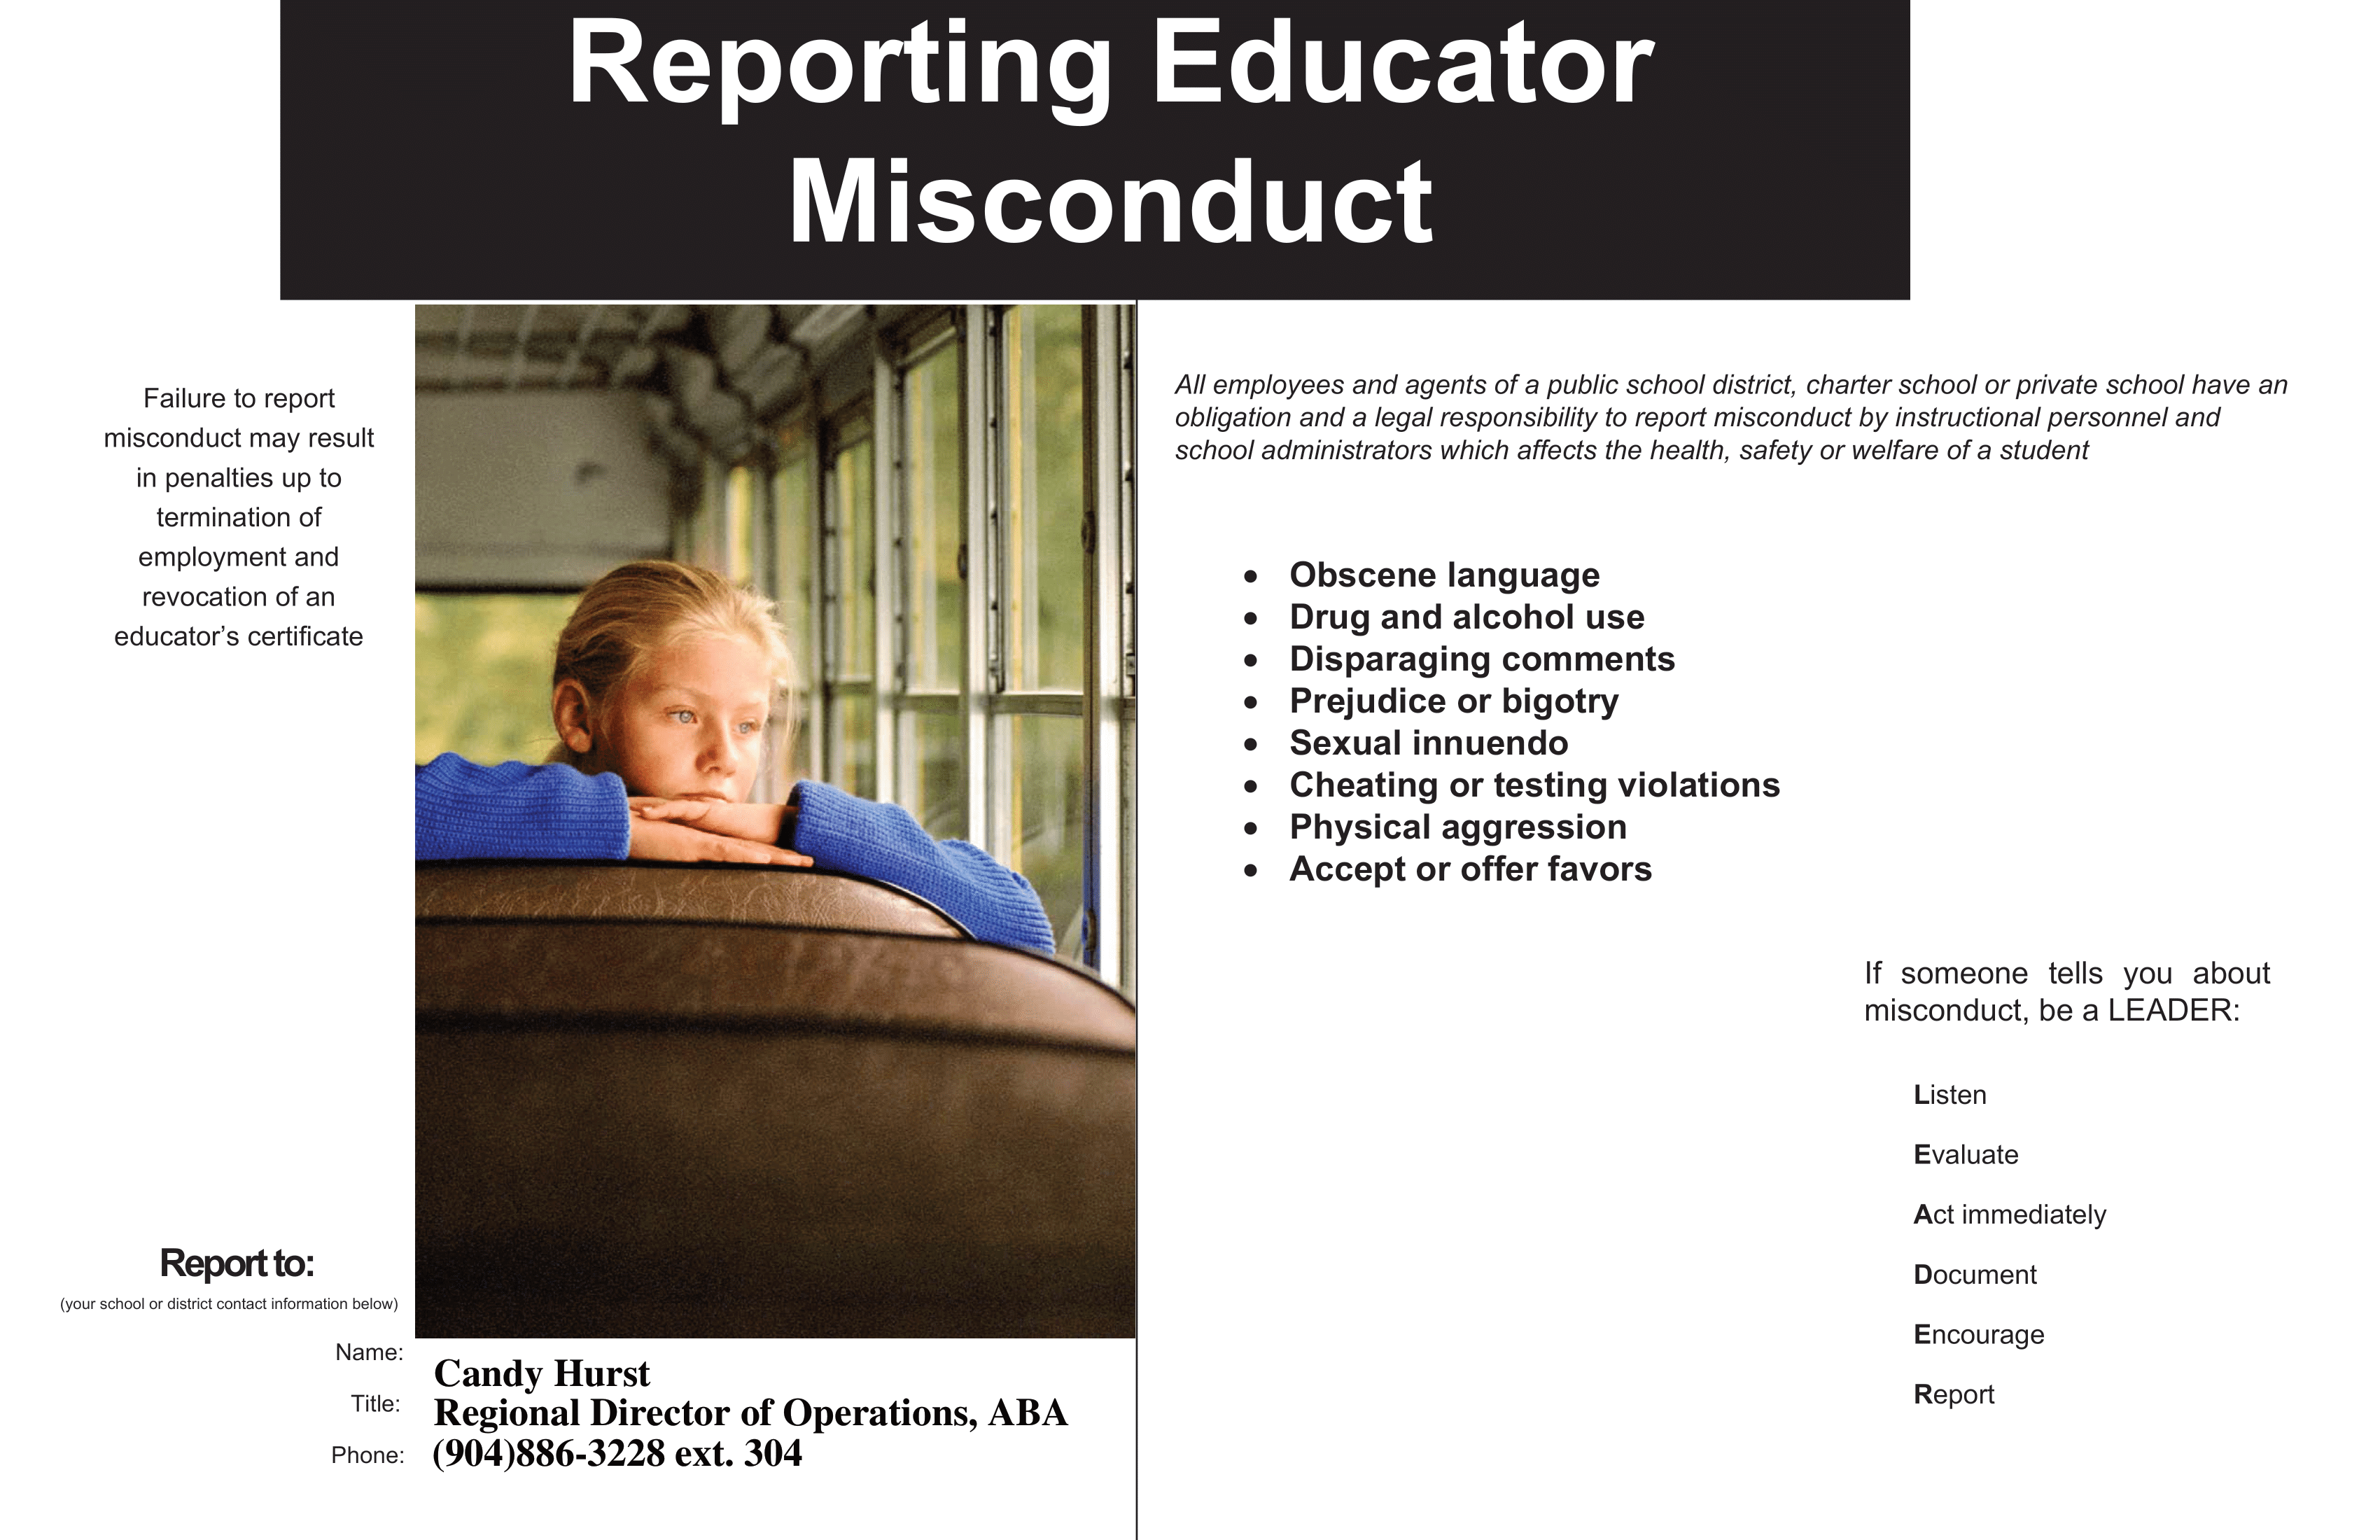 report educational misconduct